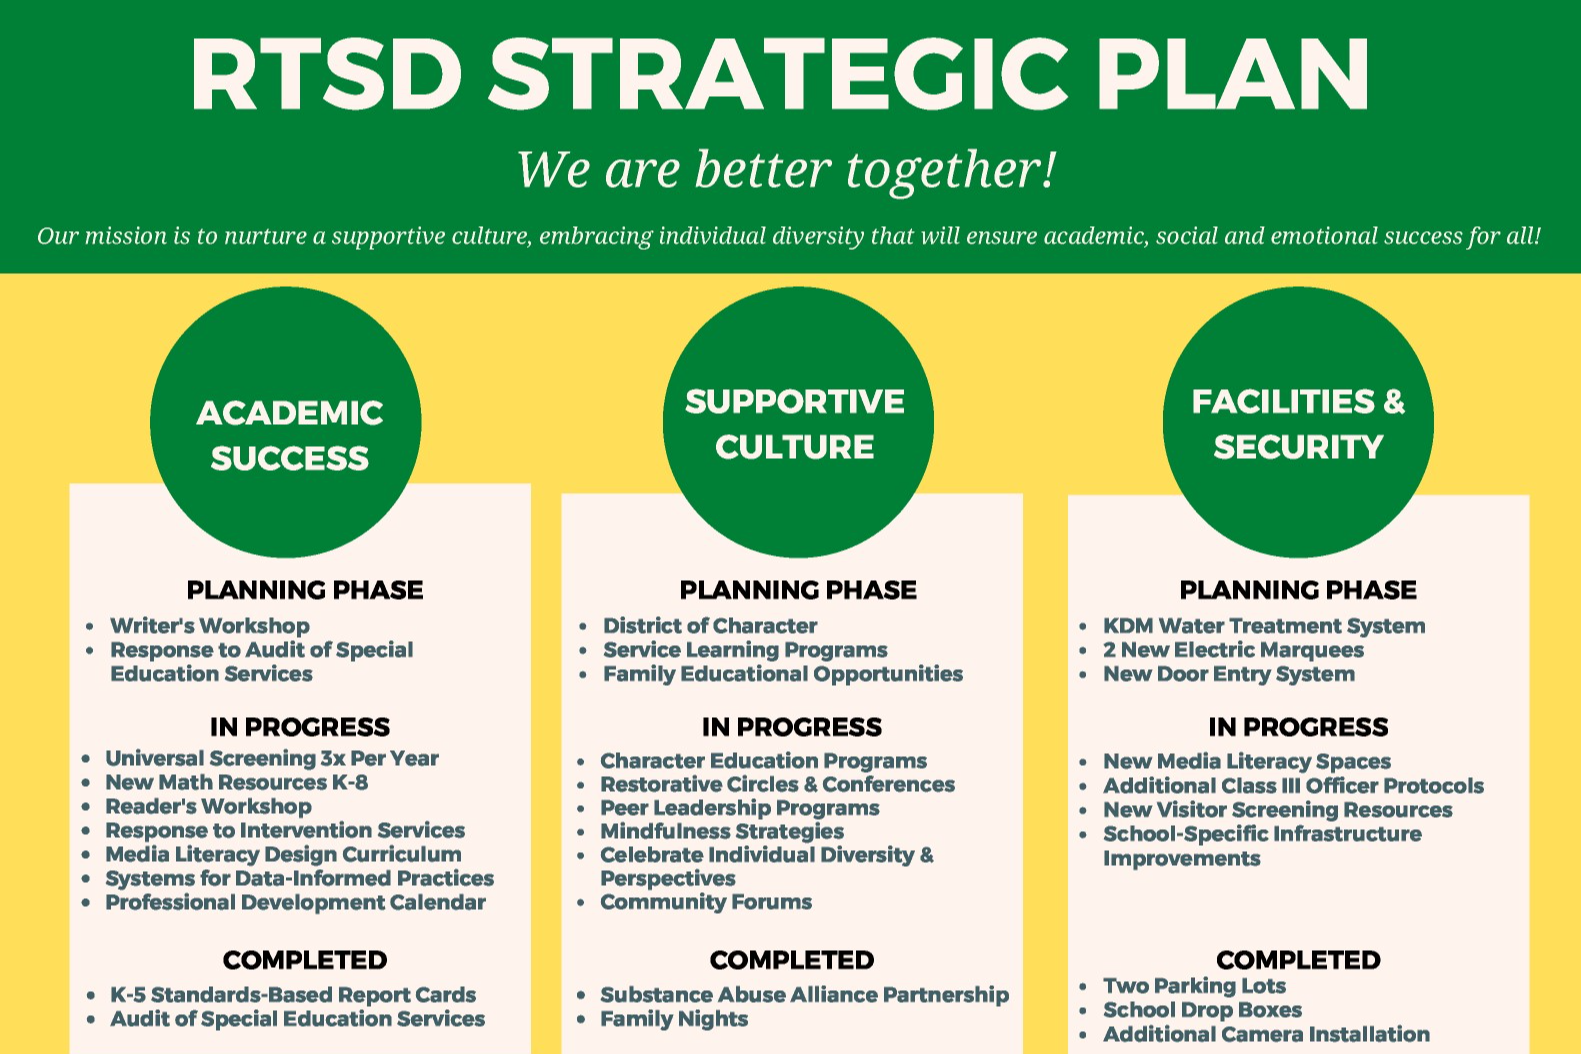 A thumbnail image of the RTSD Strategic Plan Dashboard that can be found on the Strategic Plan webpage as text.  The Dashboard is Green and Yellow with 3 Green Circles bearing headings.  